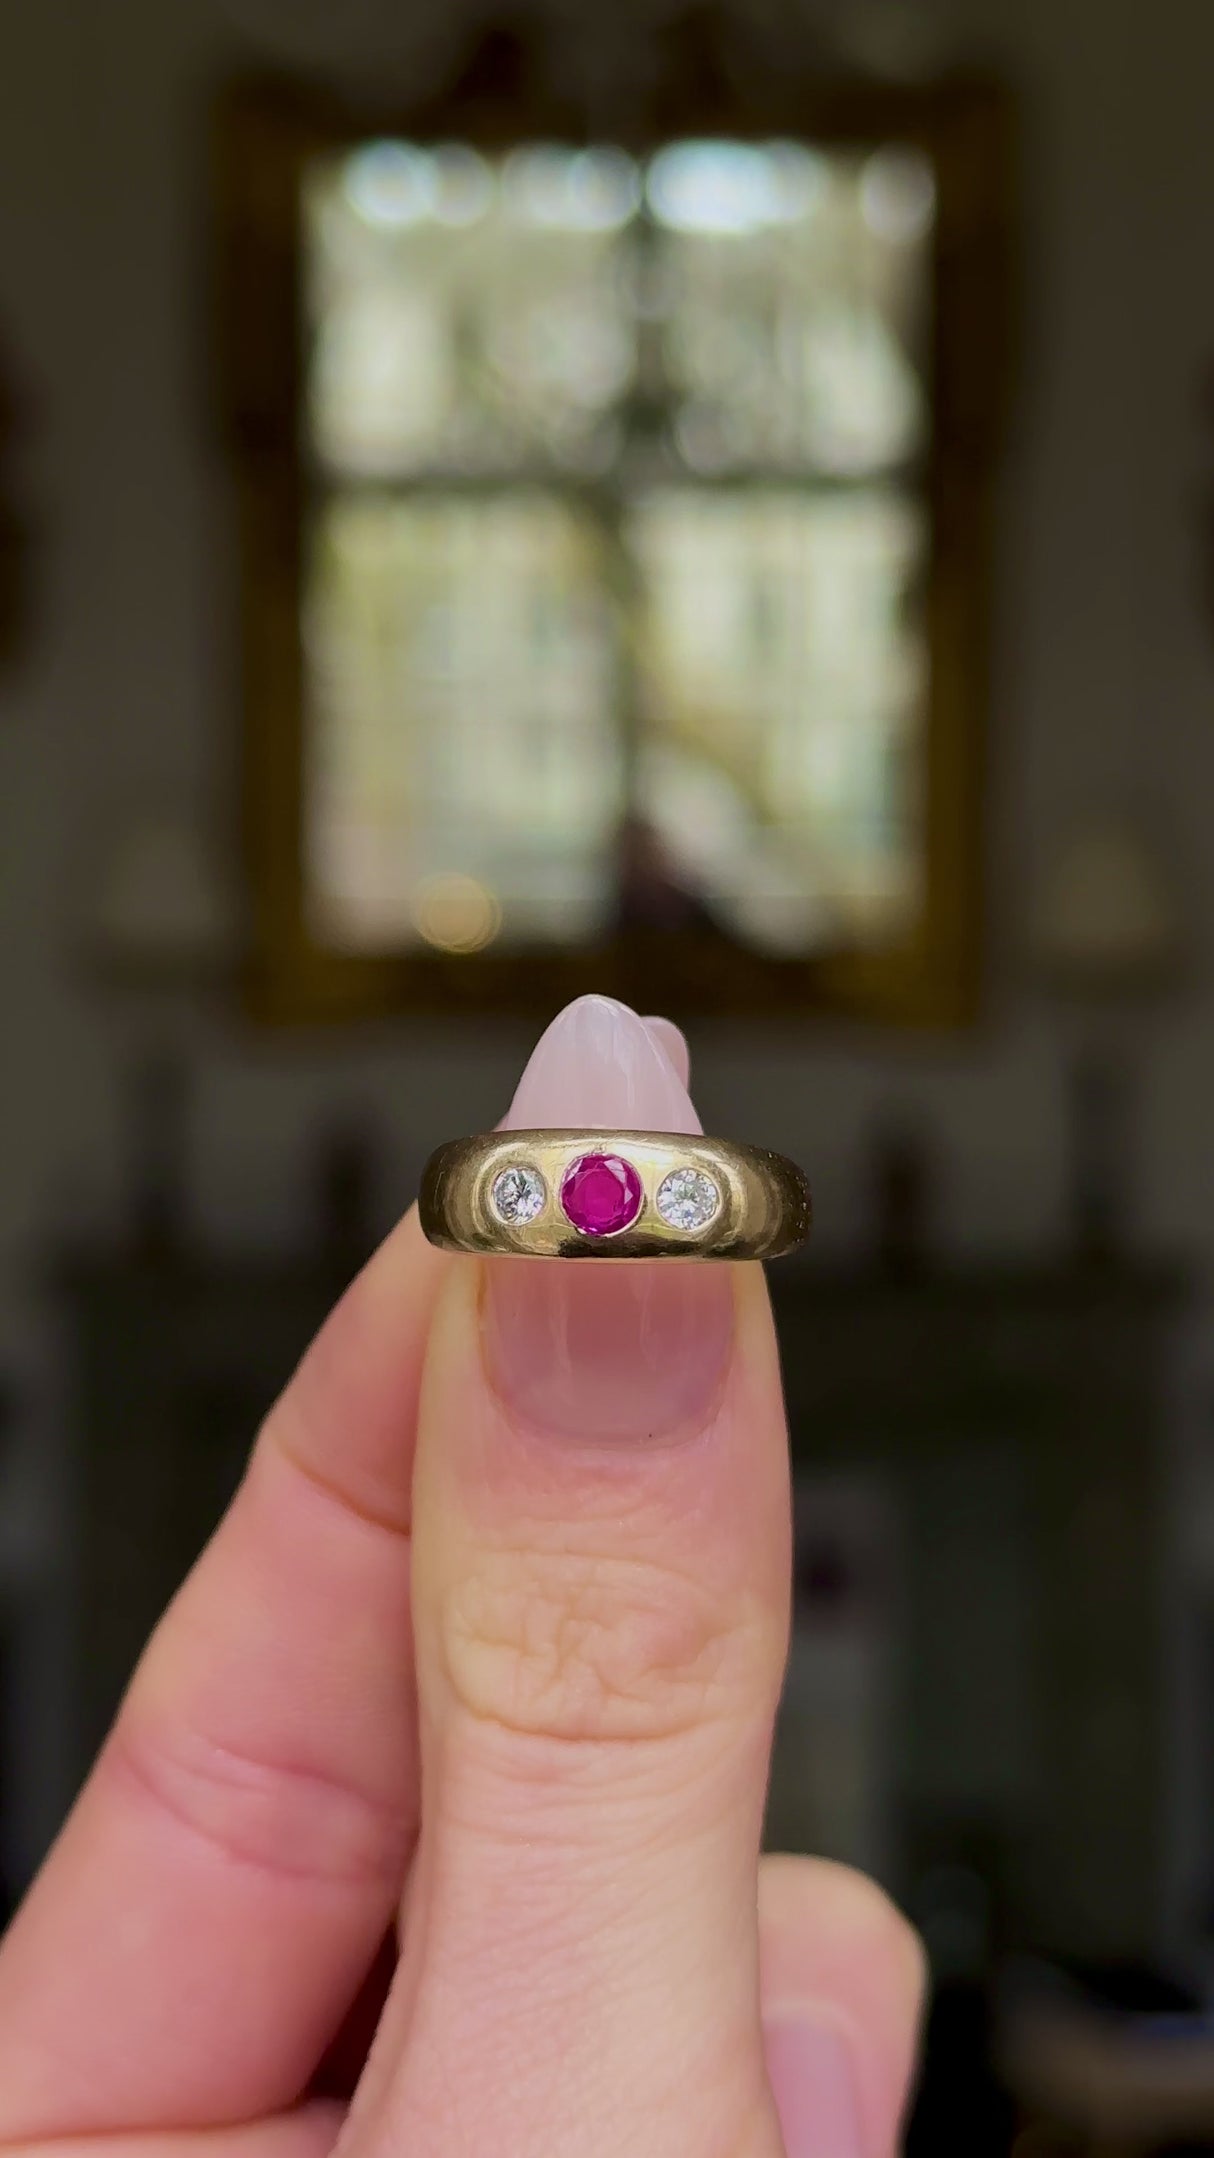 Antique, Edwardian Ruby and Diamond Gypsy Ring, held in fingers and rotated to give perspective.